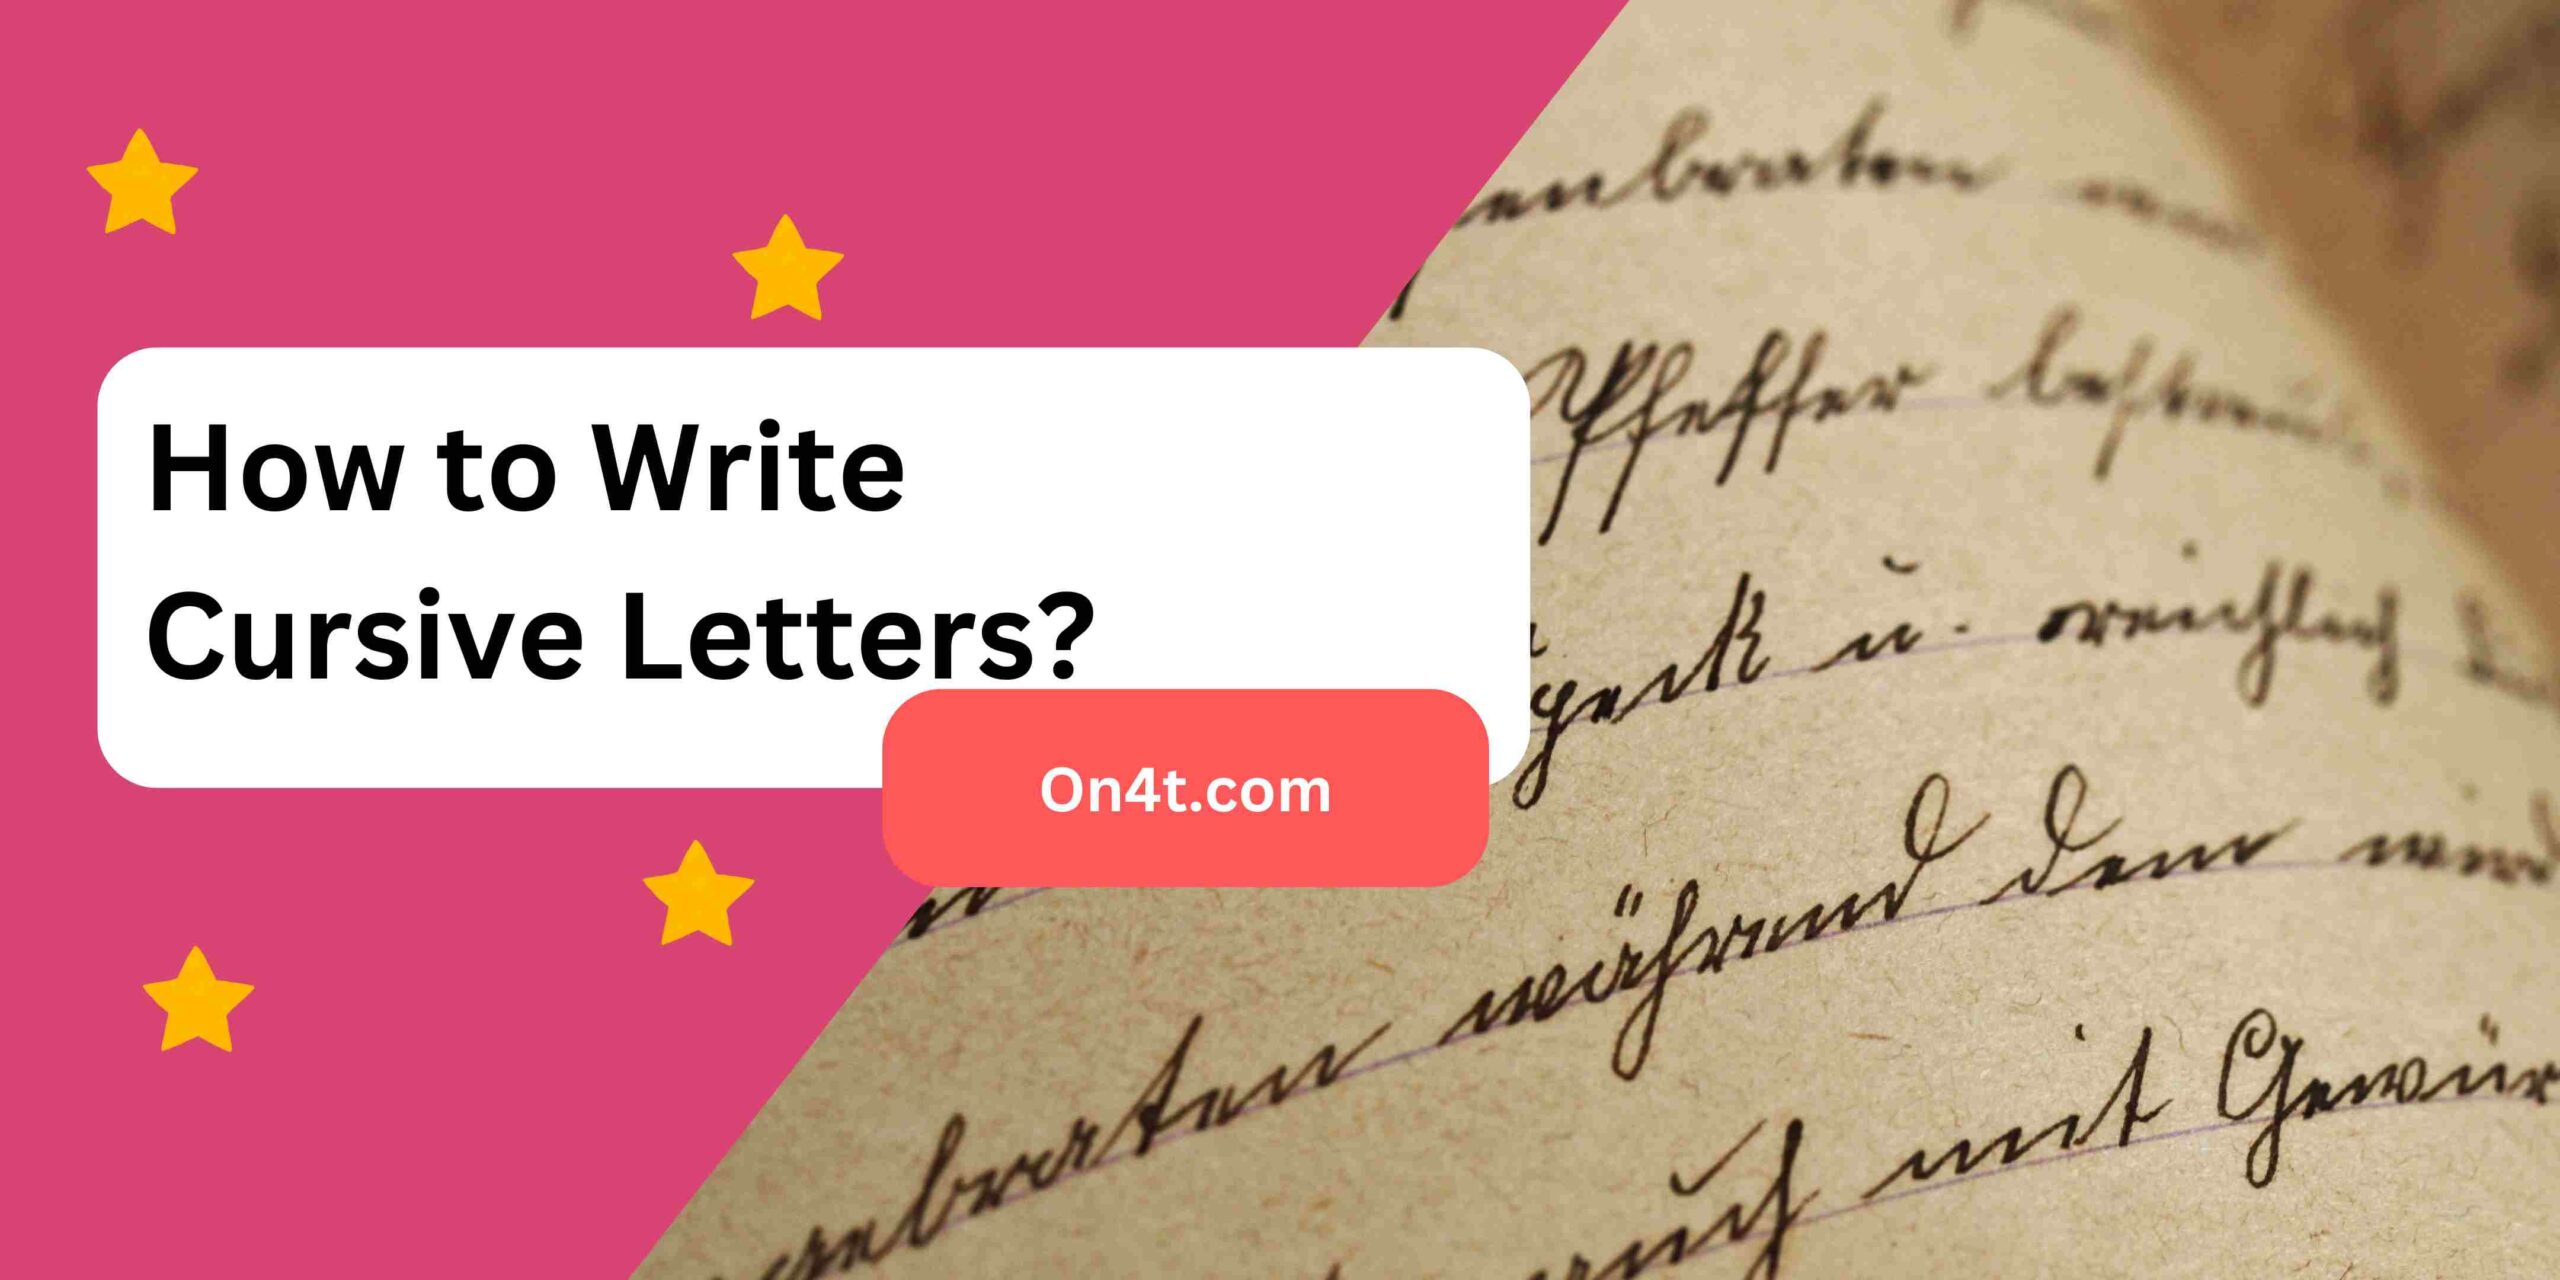 How to Write Cursive Letters